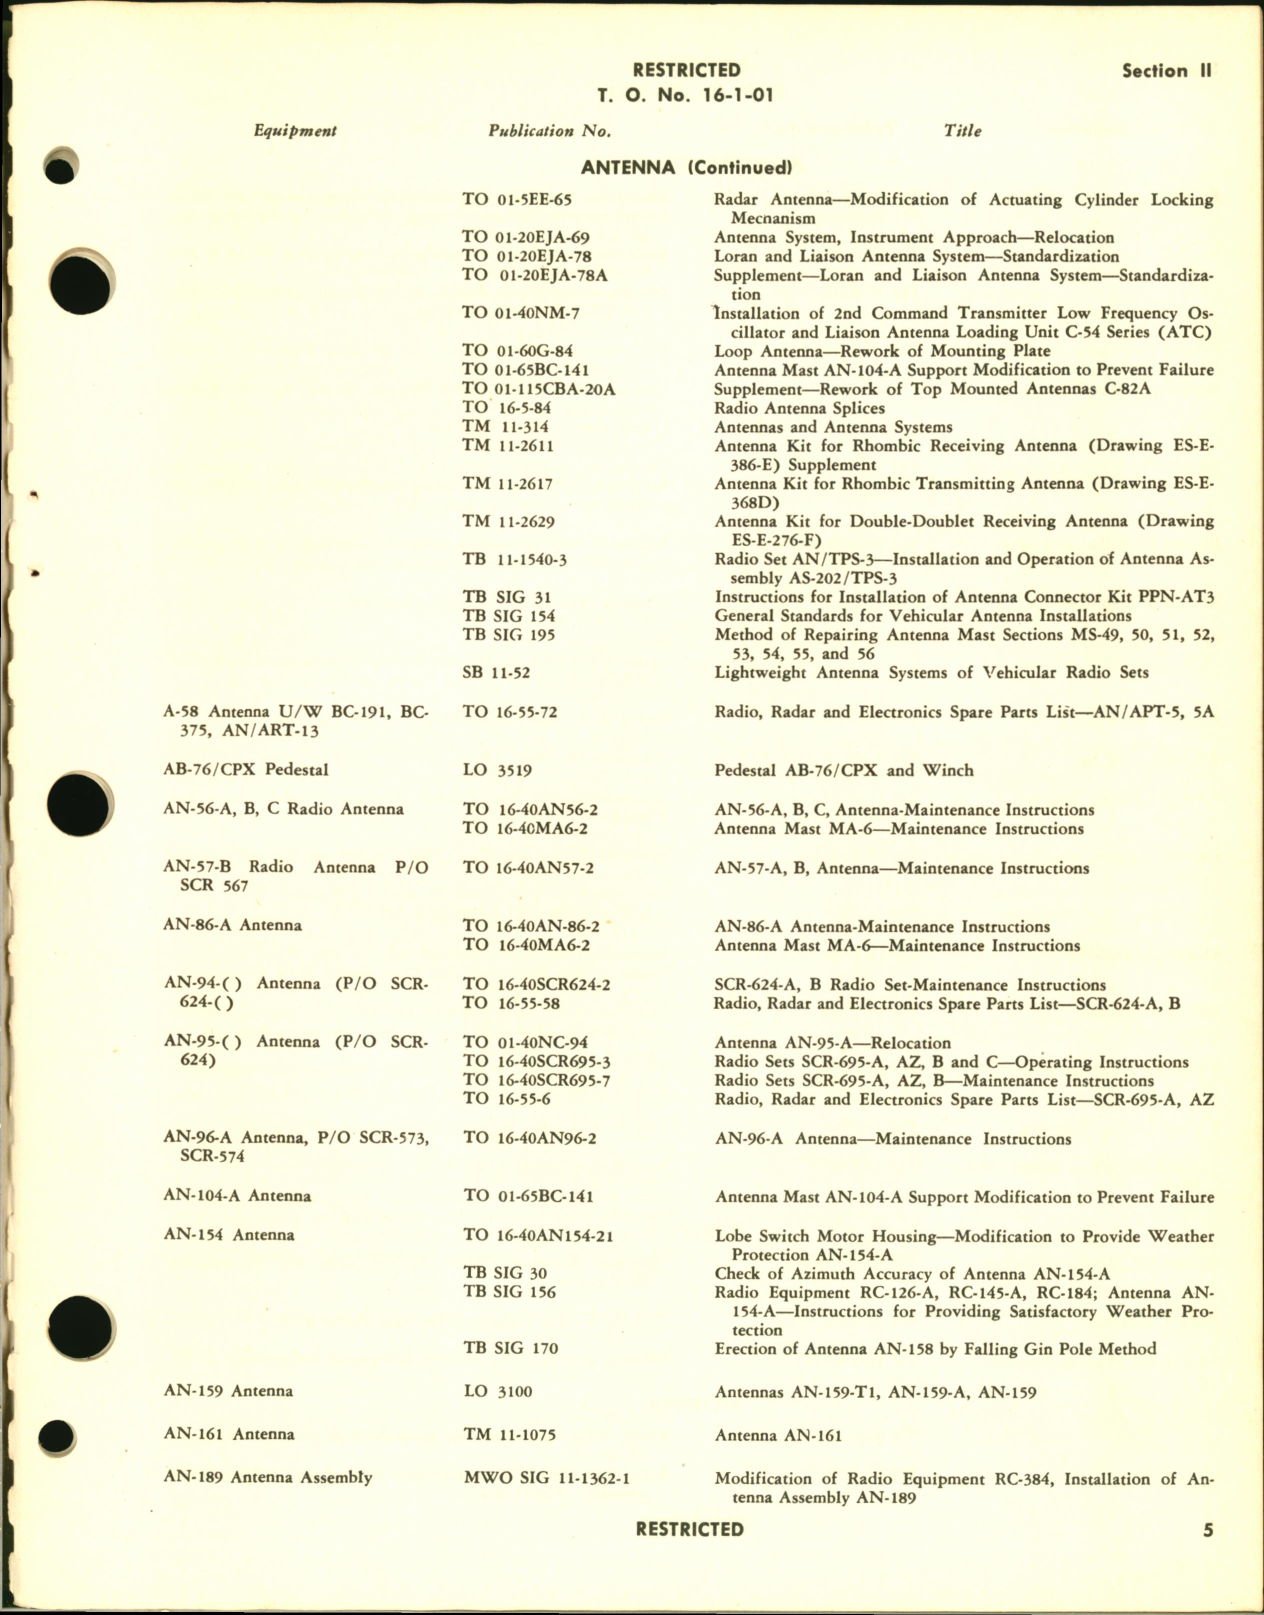 Sample page 7 from AirCorps Library document: List of Technical Publications - Communications Equipment